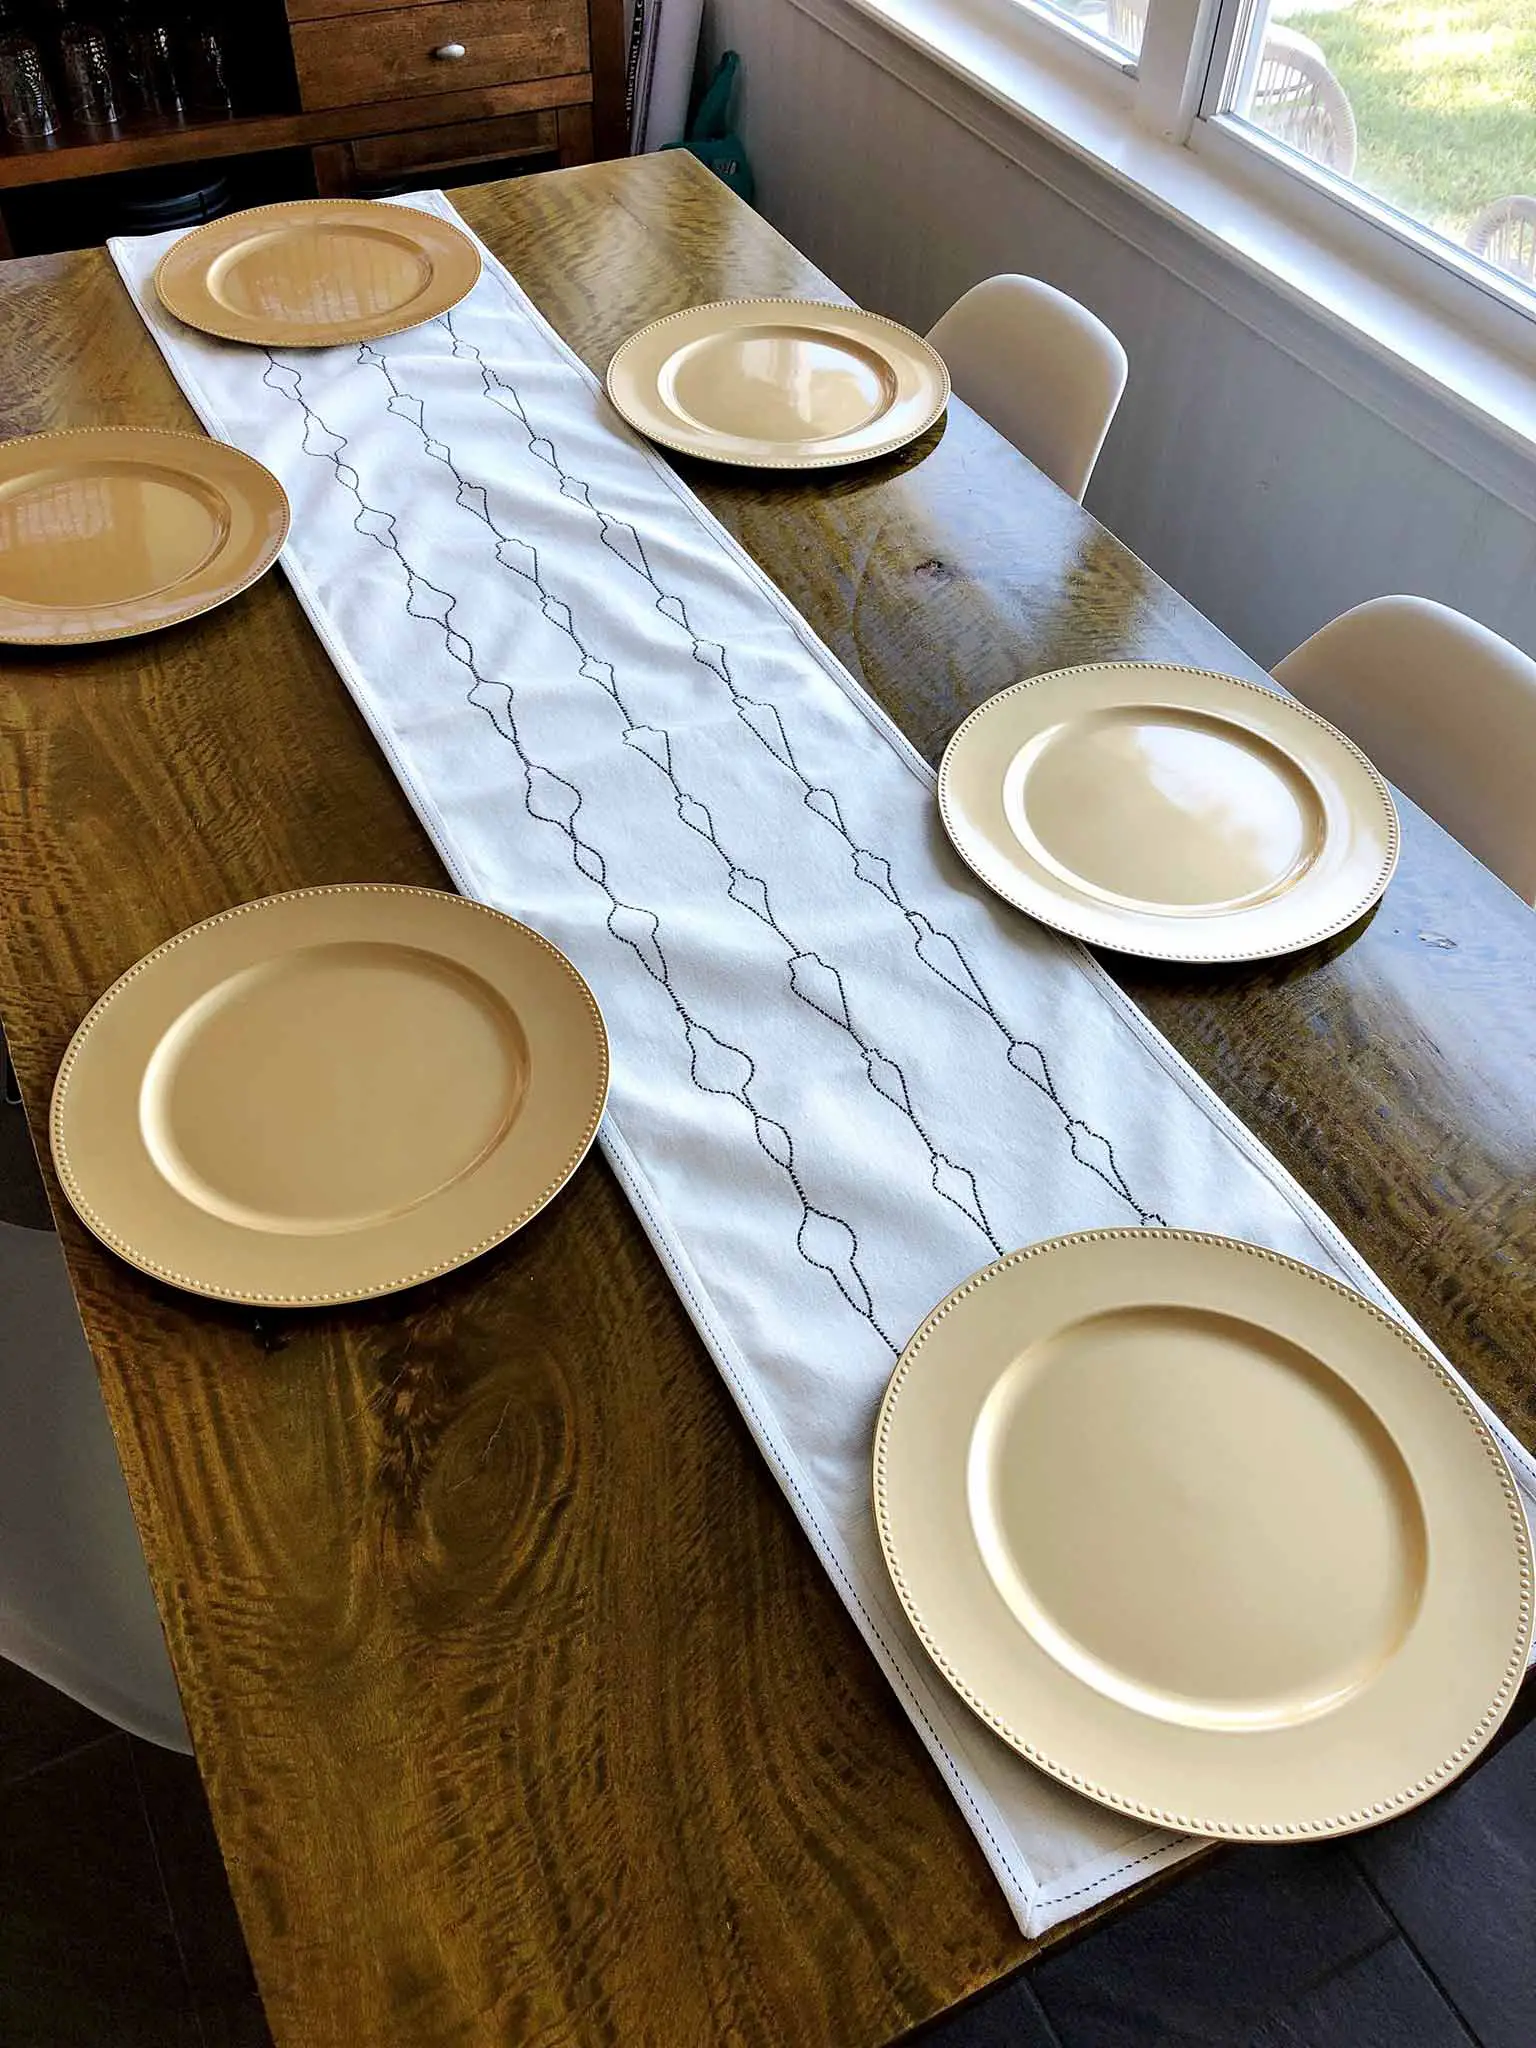 Table runner and gold chargers | How to Create a Beautiful Tablescape on a Budget | That Homebird Life Blog #christmasdecor #tablescape